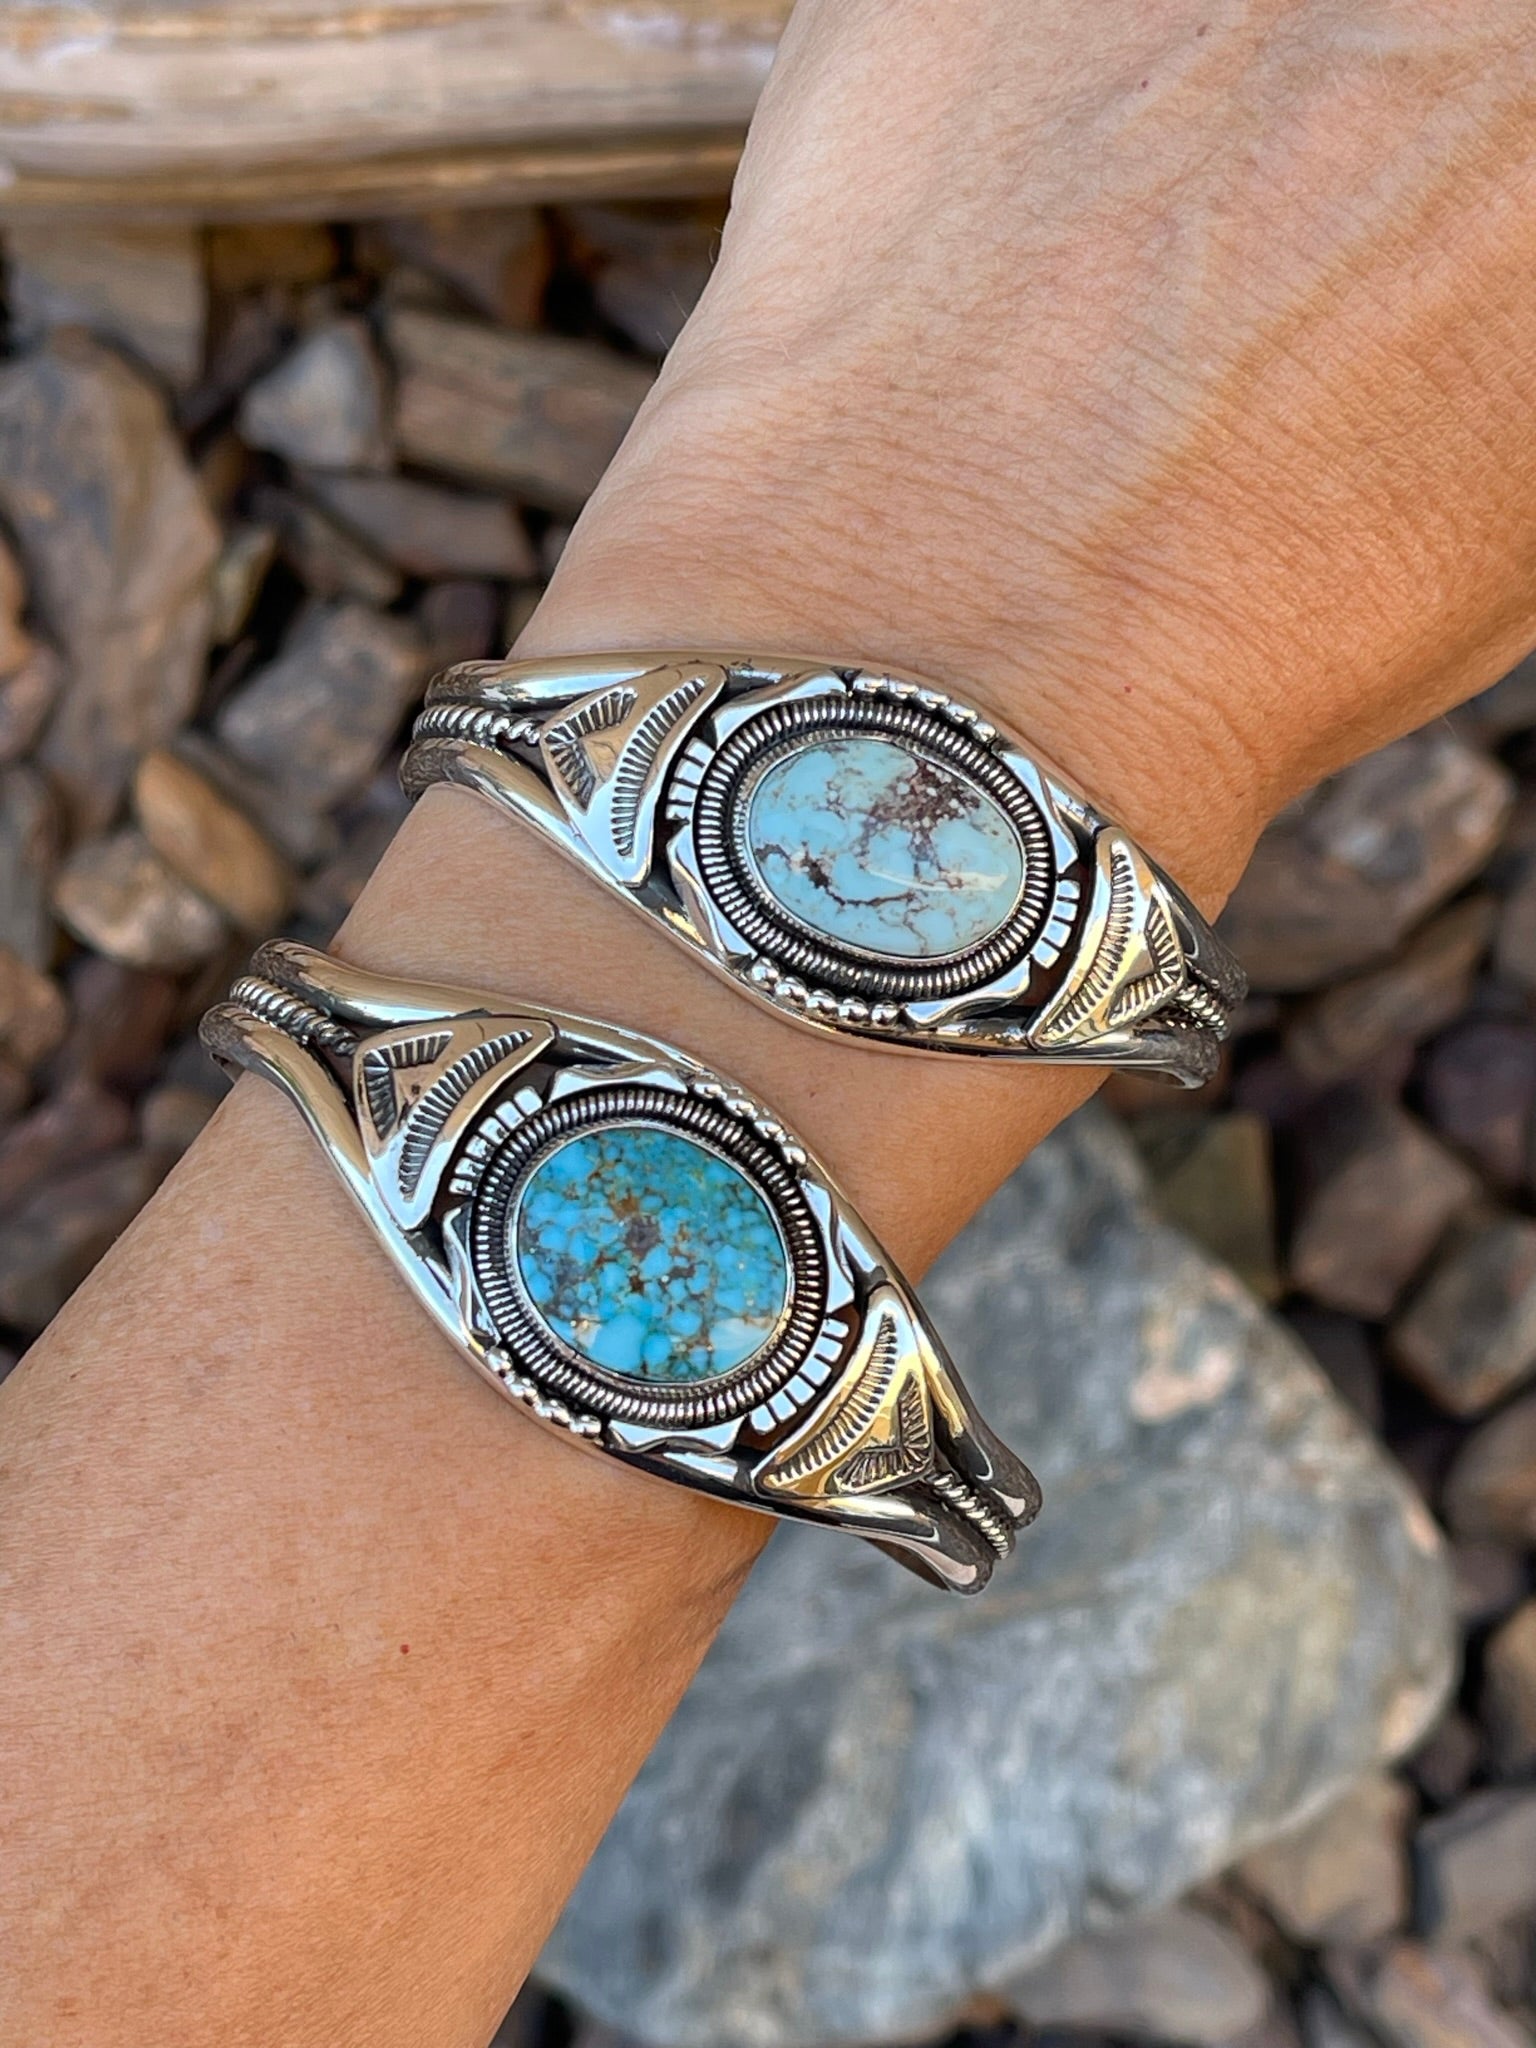 Handmade Sterling Silver Dry Creek Turquoise Bracelet with Coil Detail